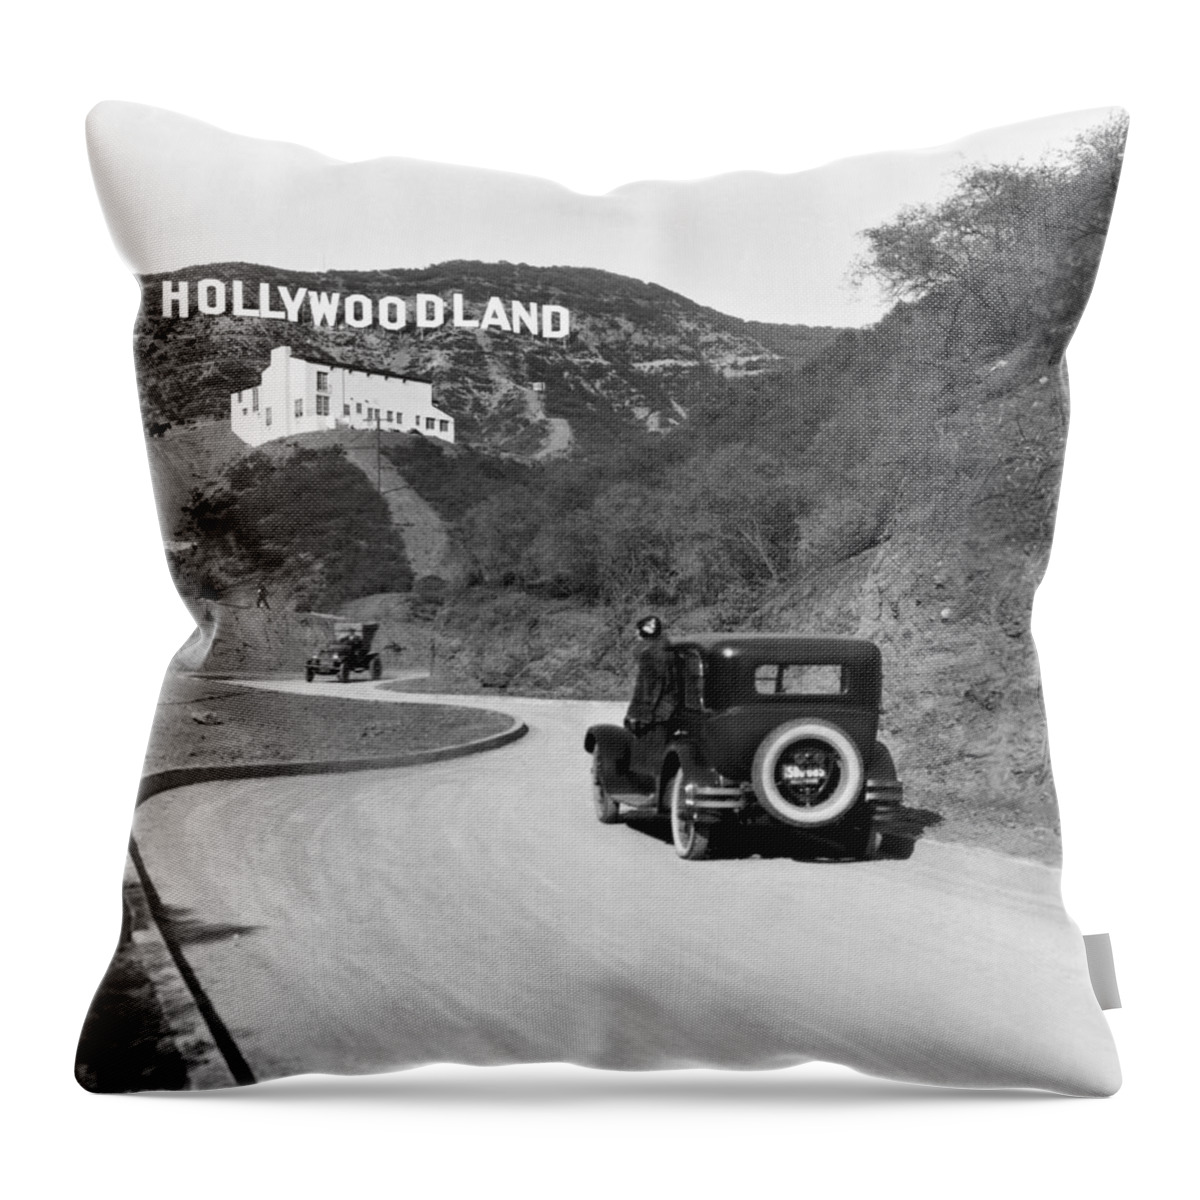 #faatoppicks Throw Pillow featuring the photograph Hollywoodland by Underwood Archives